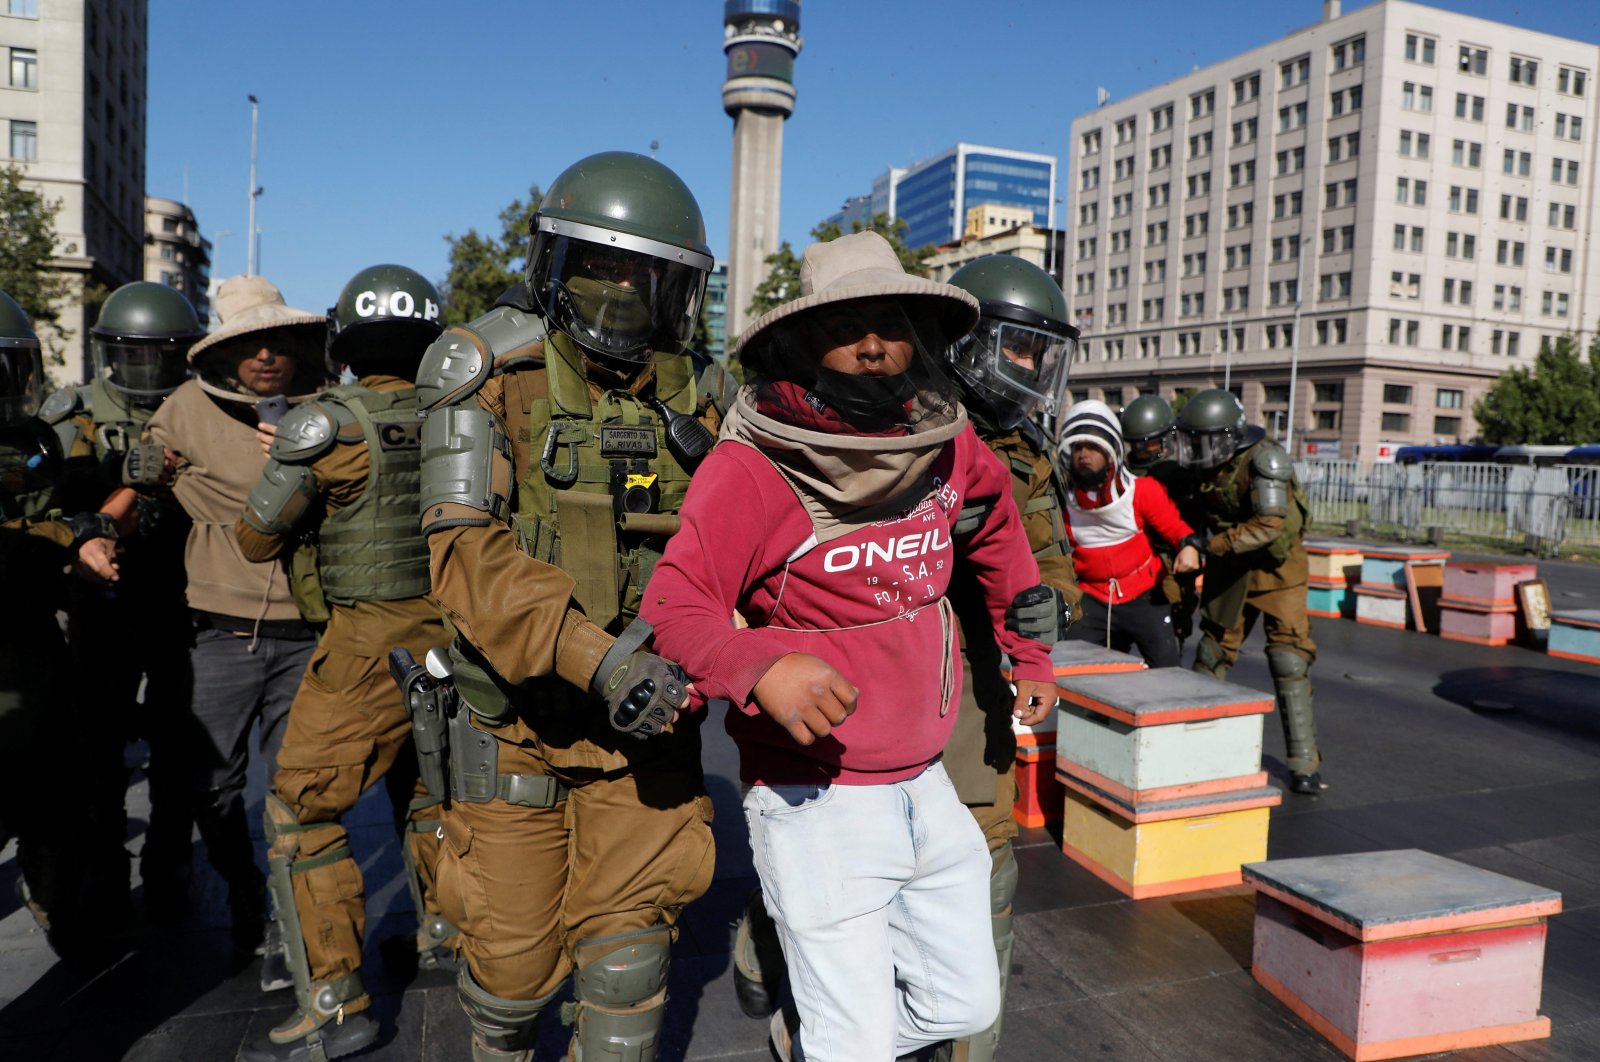 Beekeepers who demanded government measures to face the persistent drought that affects the country are detained by riot police after they blocked the street with honeycombs full of bees in front of the Chilean presidential palace, Santiago, Chile, Jan. 3, 2022. (Reuters Photo)